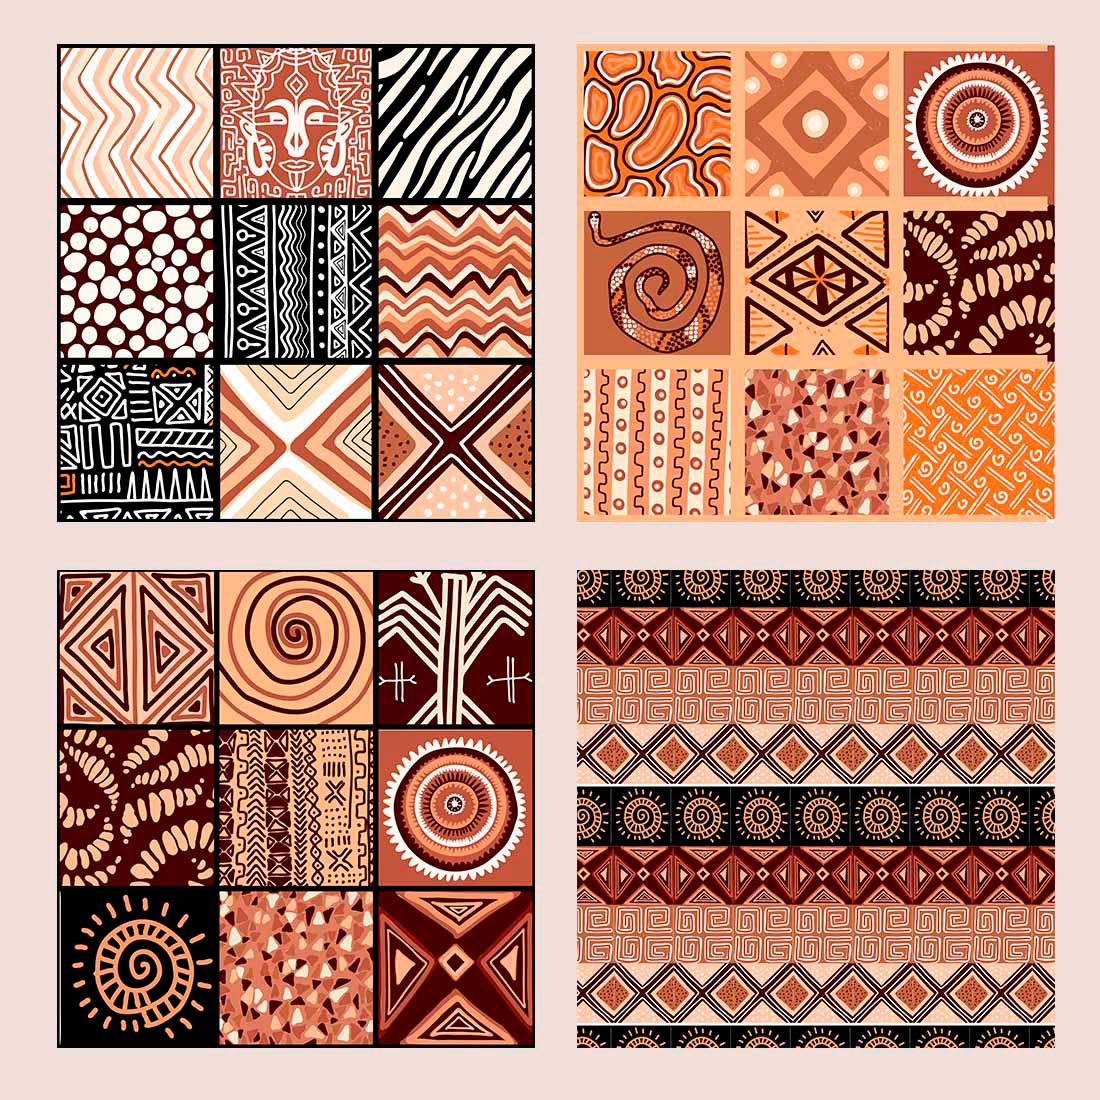 A selection of amazing images of patterns in African style.